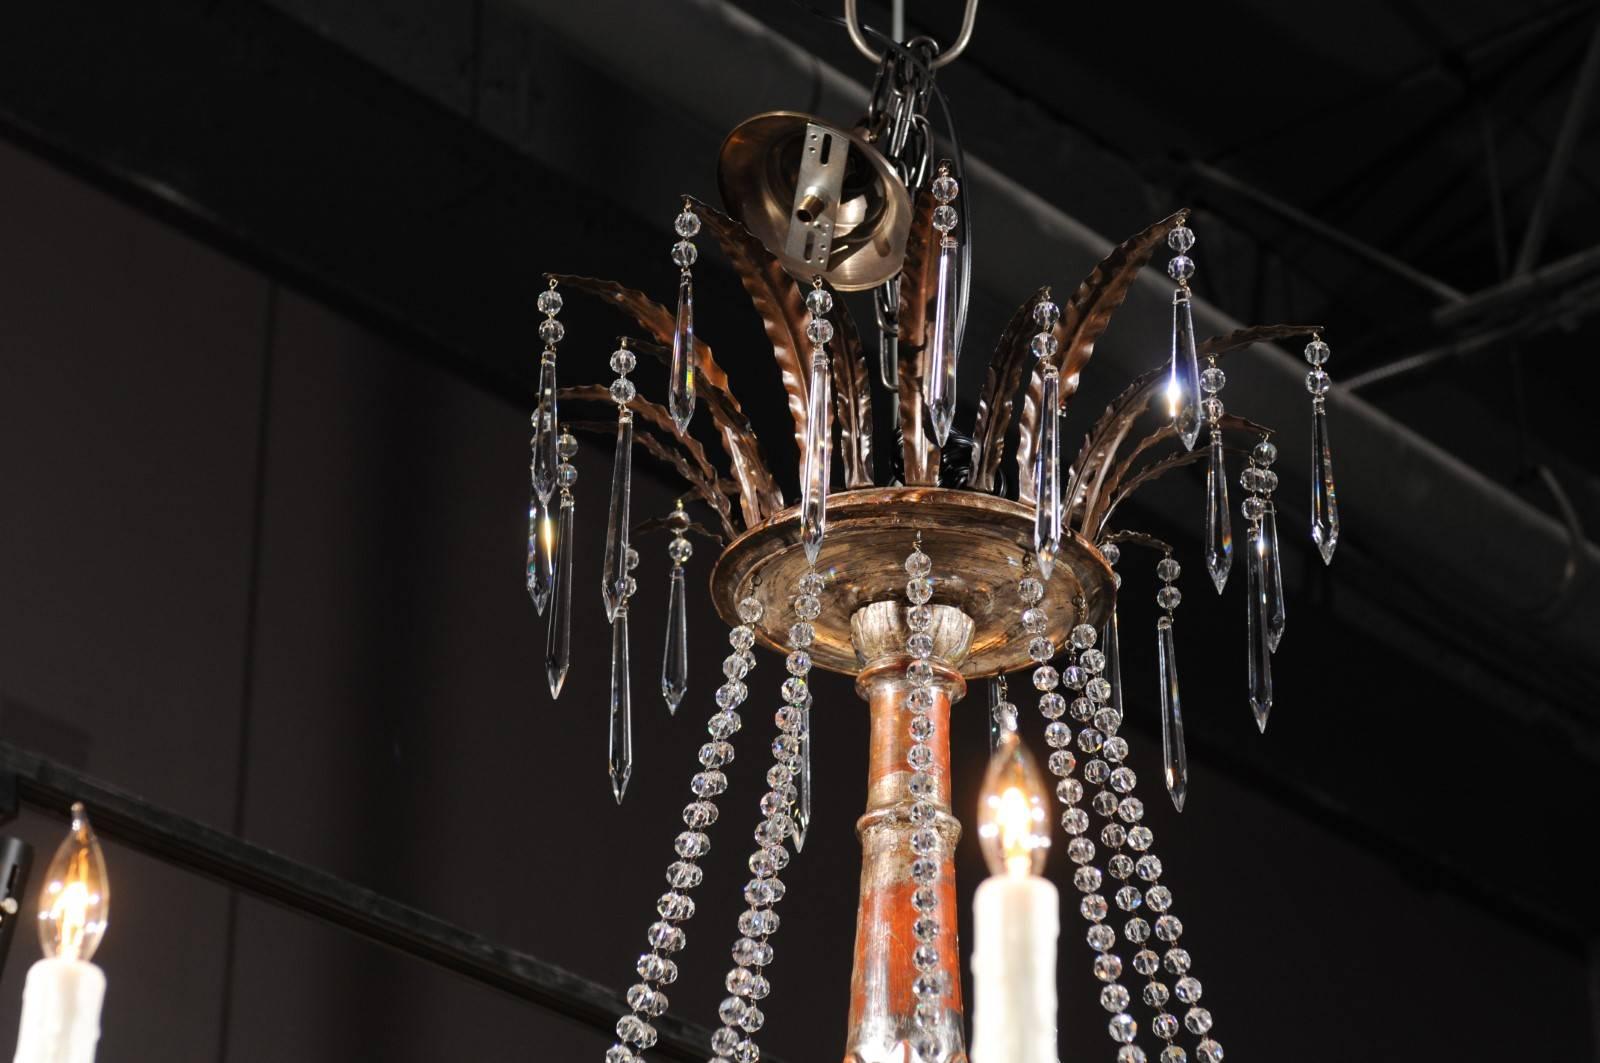 Hand-Carved Large Ten-Light Wood and Crystal Chandelier Made of 19th Century Italian Pricket